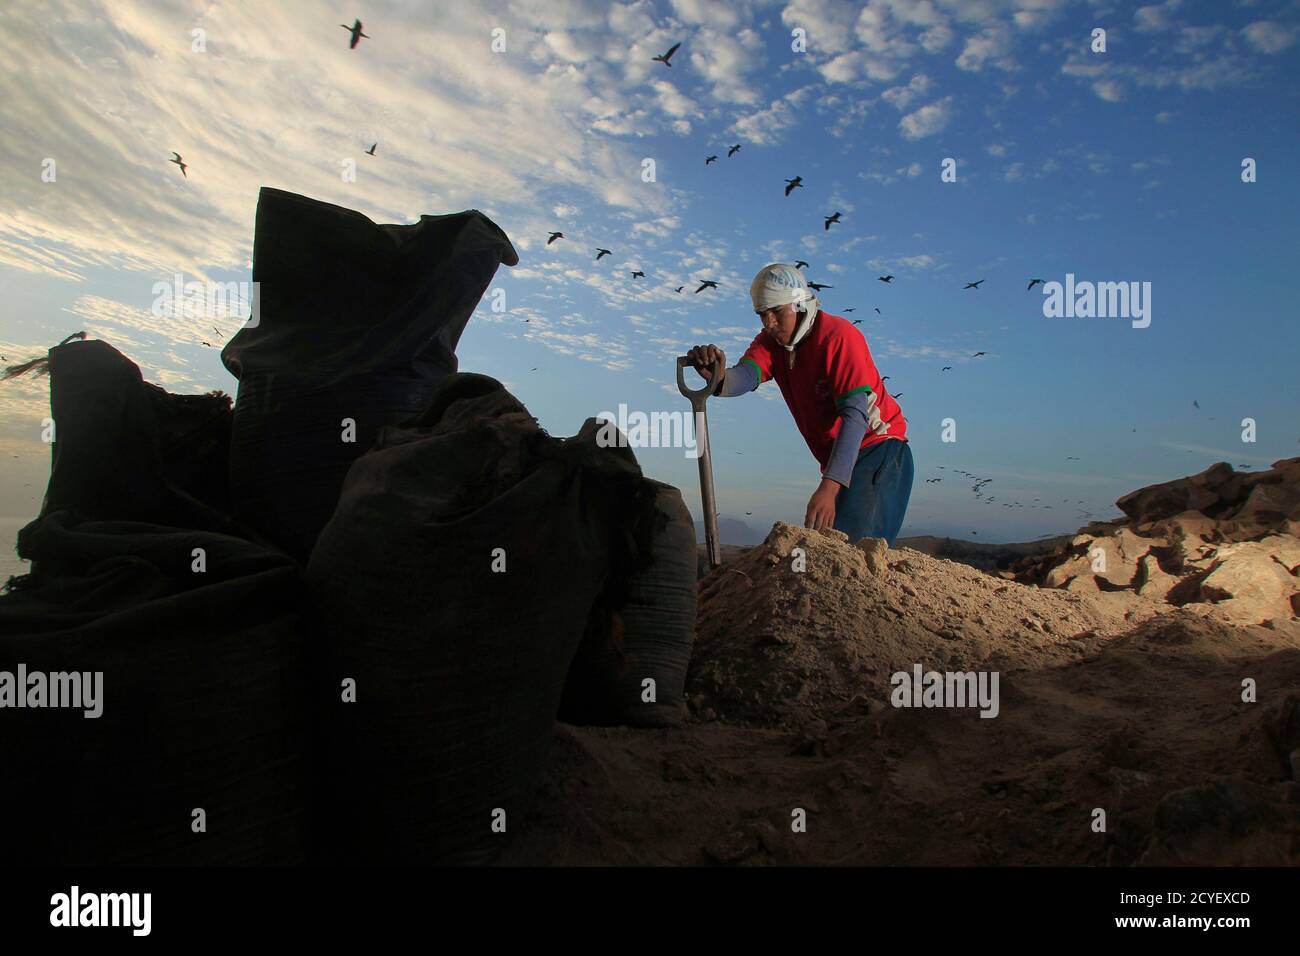 A worker collects bird dung on Ballestas island, south of Lima, October 8,  2011. Ballestas, like the other 21 islands along the Peruvian coast, is  home to nearly 4 million migratory birds